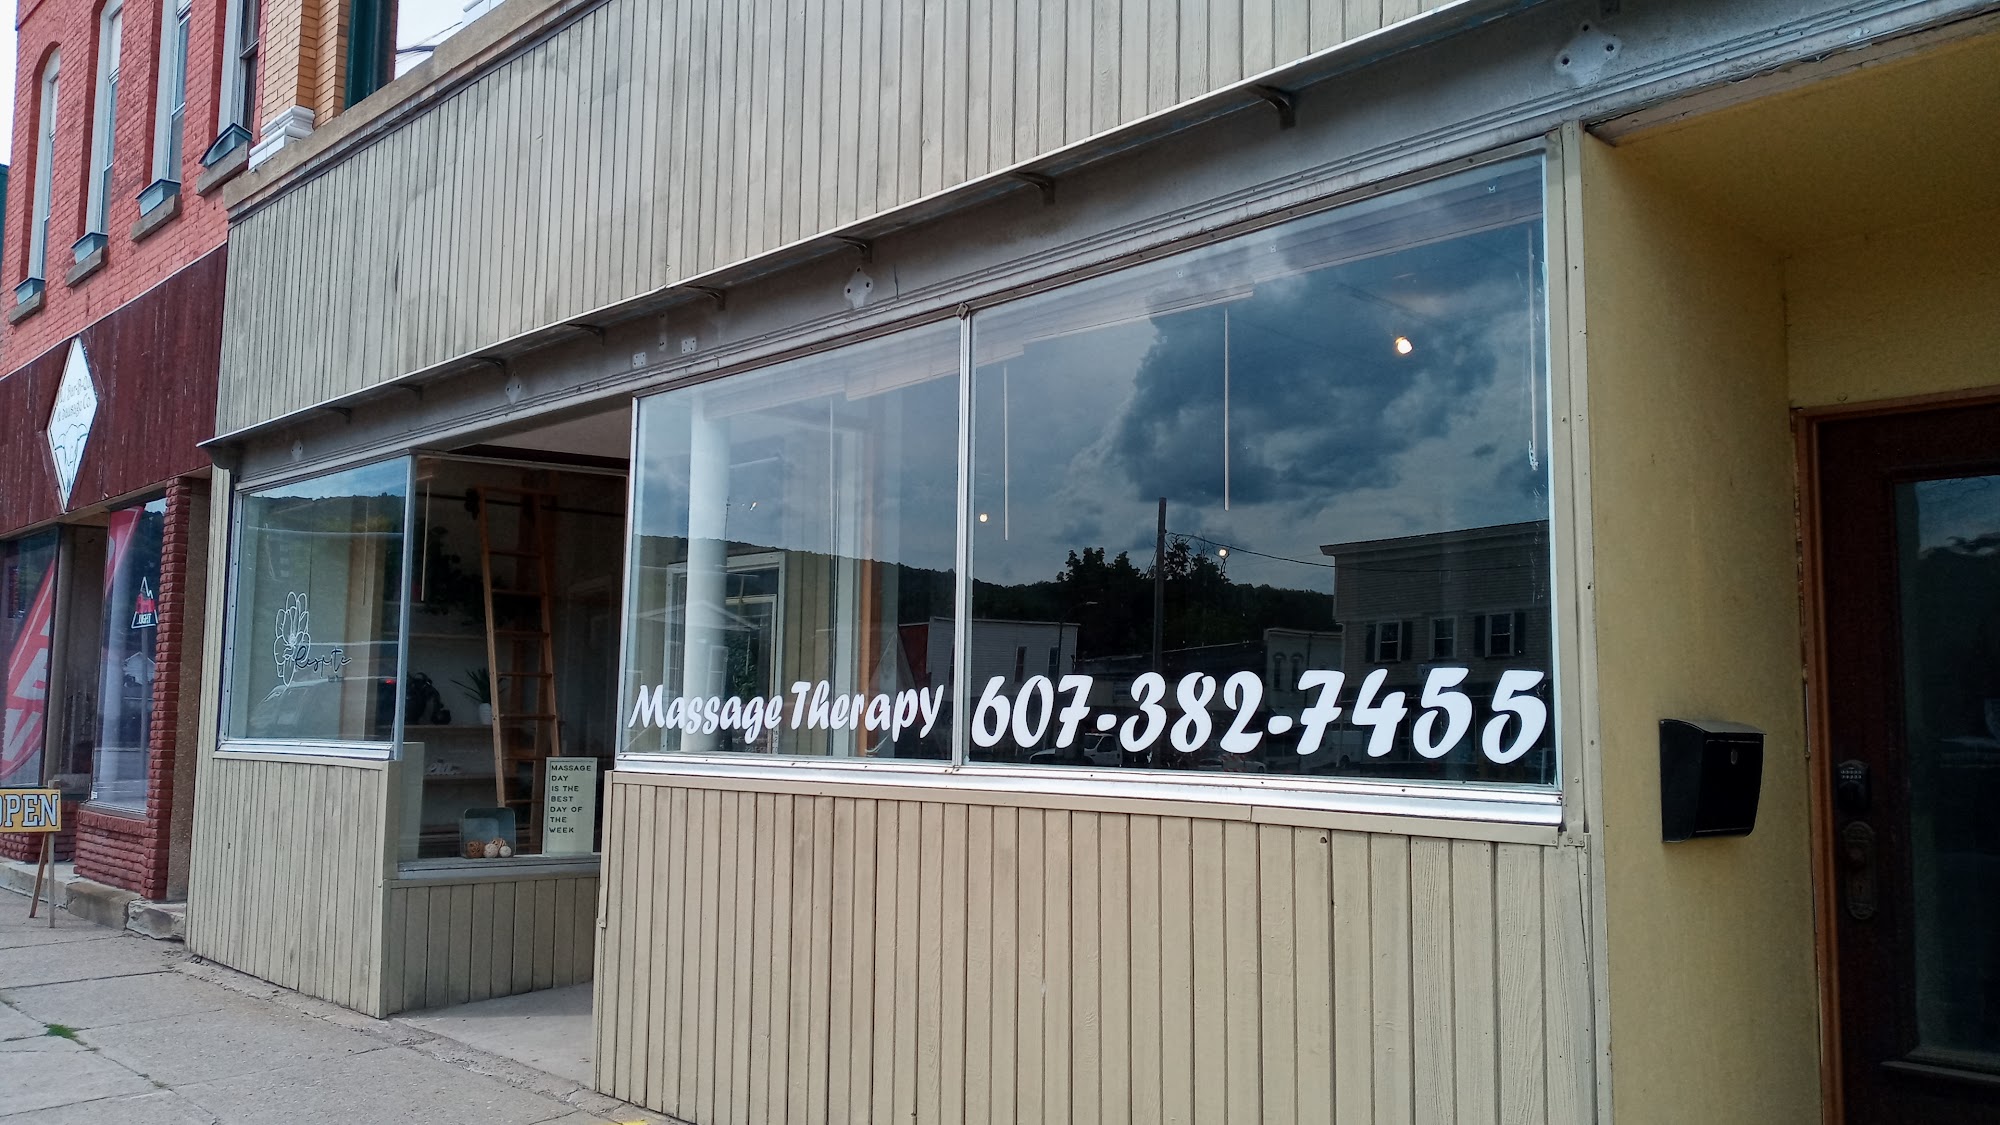 Massage Therapy 19 Main St, Canisteo New York 14823